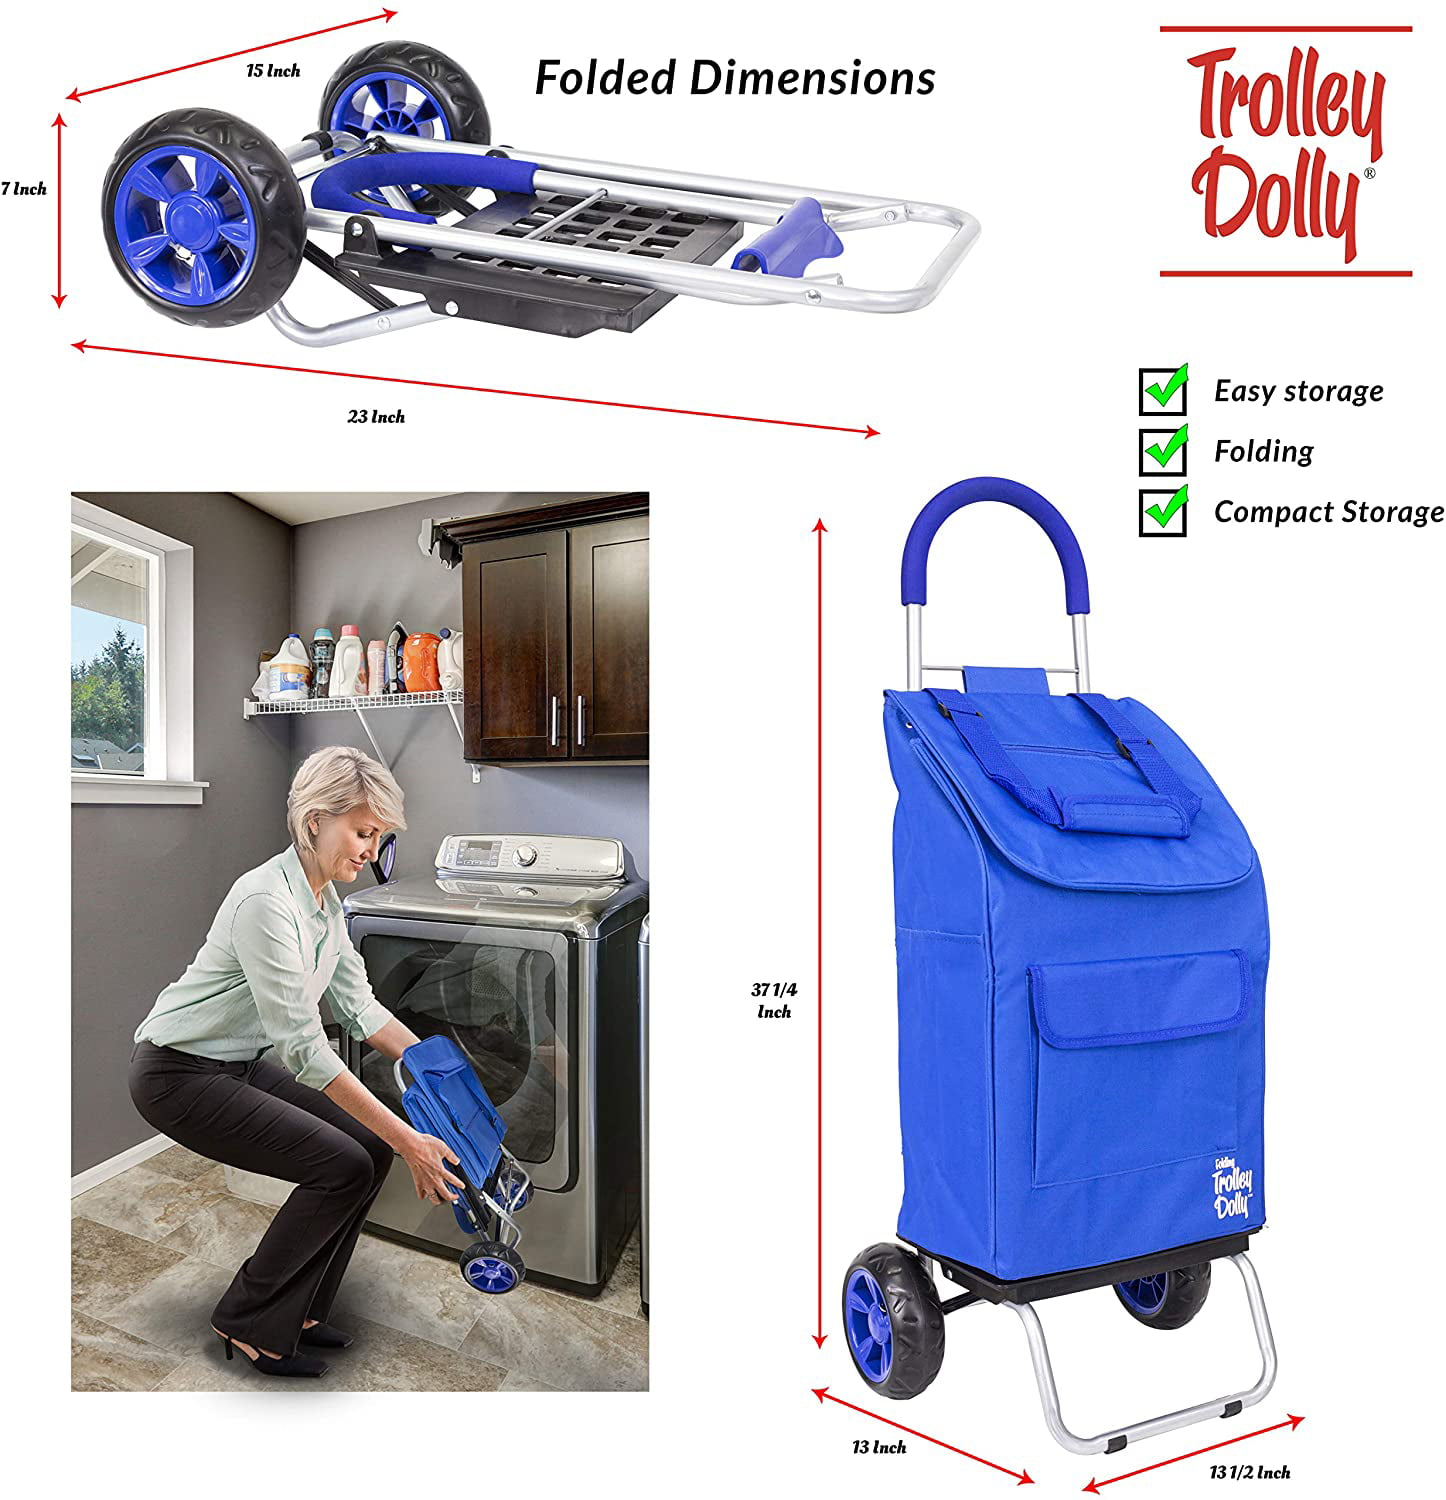 dbest products Trolley Dolly Daisy Shopping Grocery Foldable Cart 